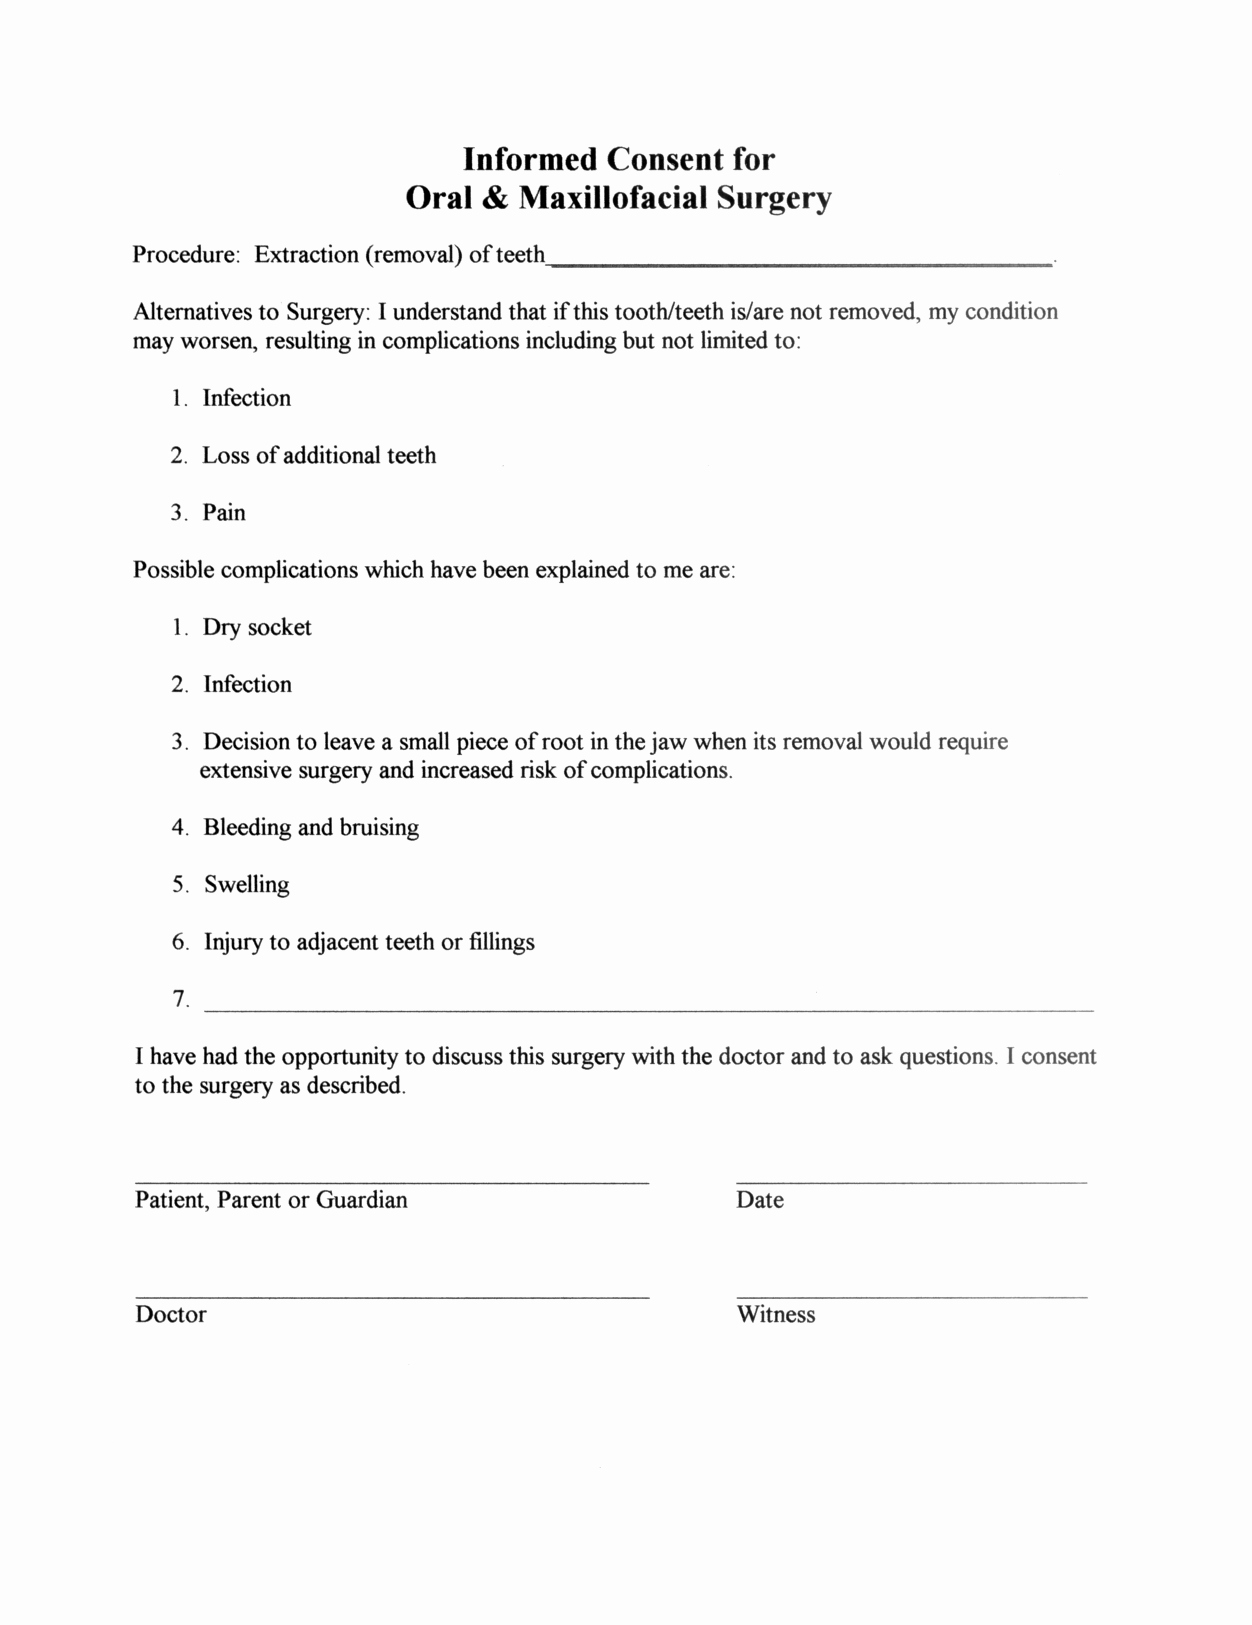 Photo Consent form Template Awesome Surgery Informed Consent form Template